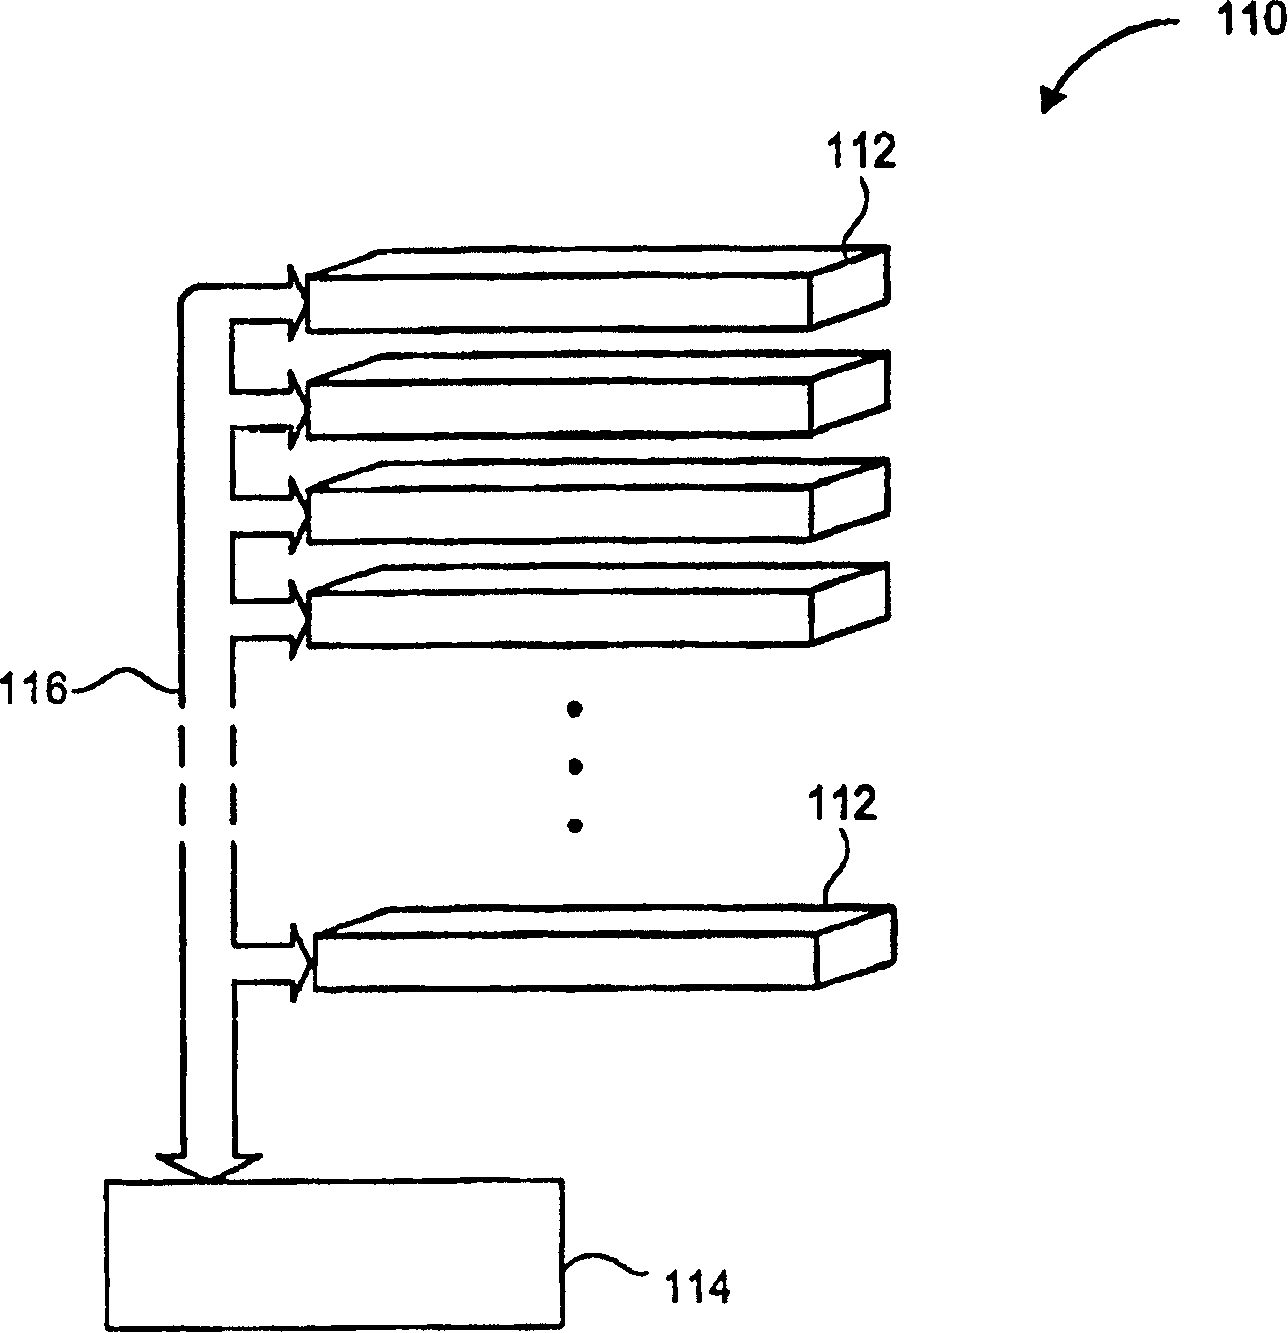 Method for generating solid memory address configuration